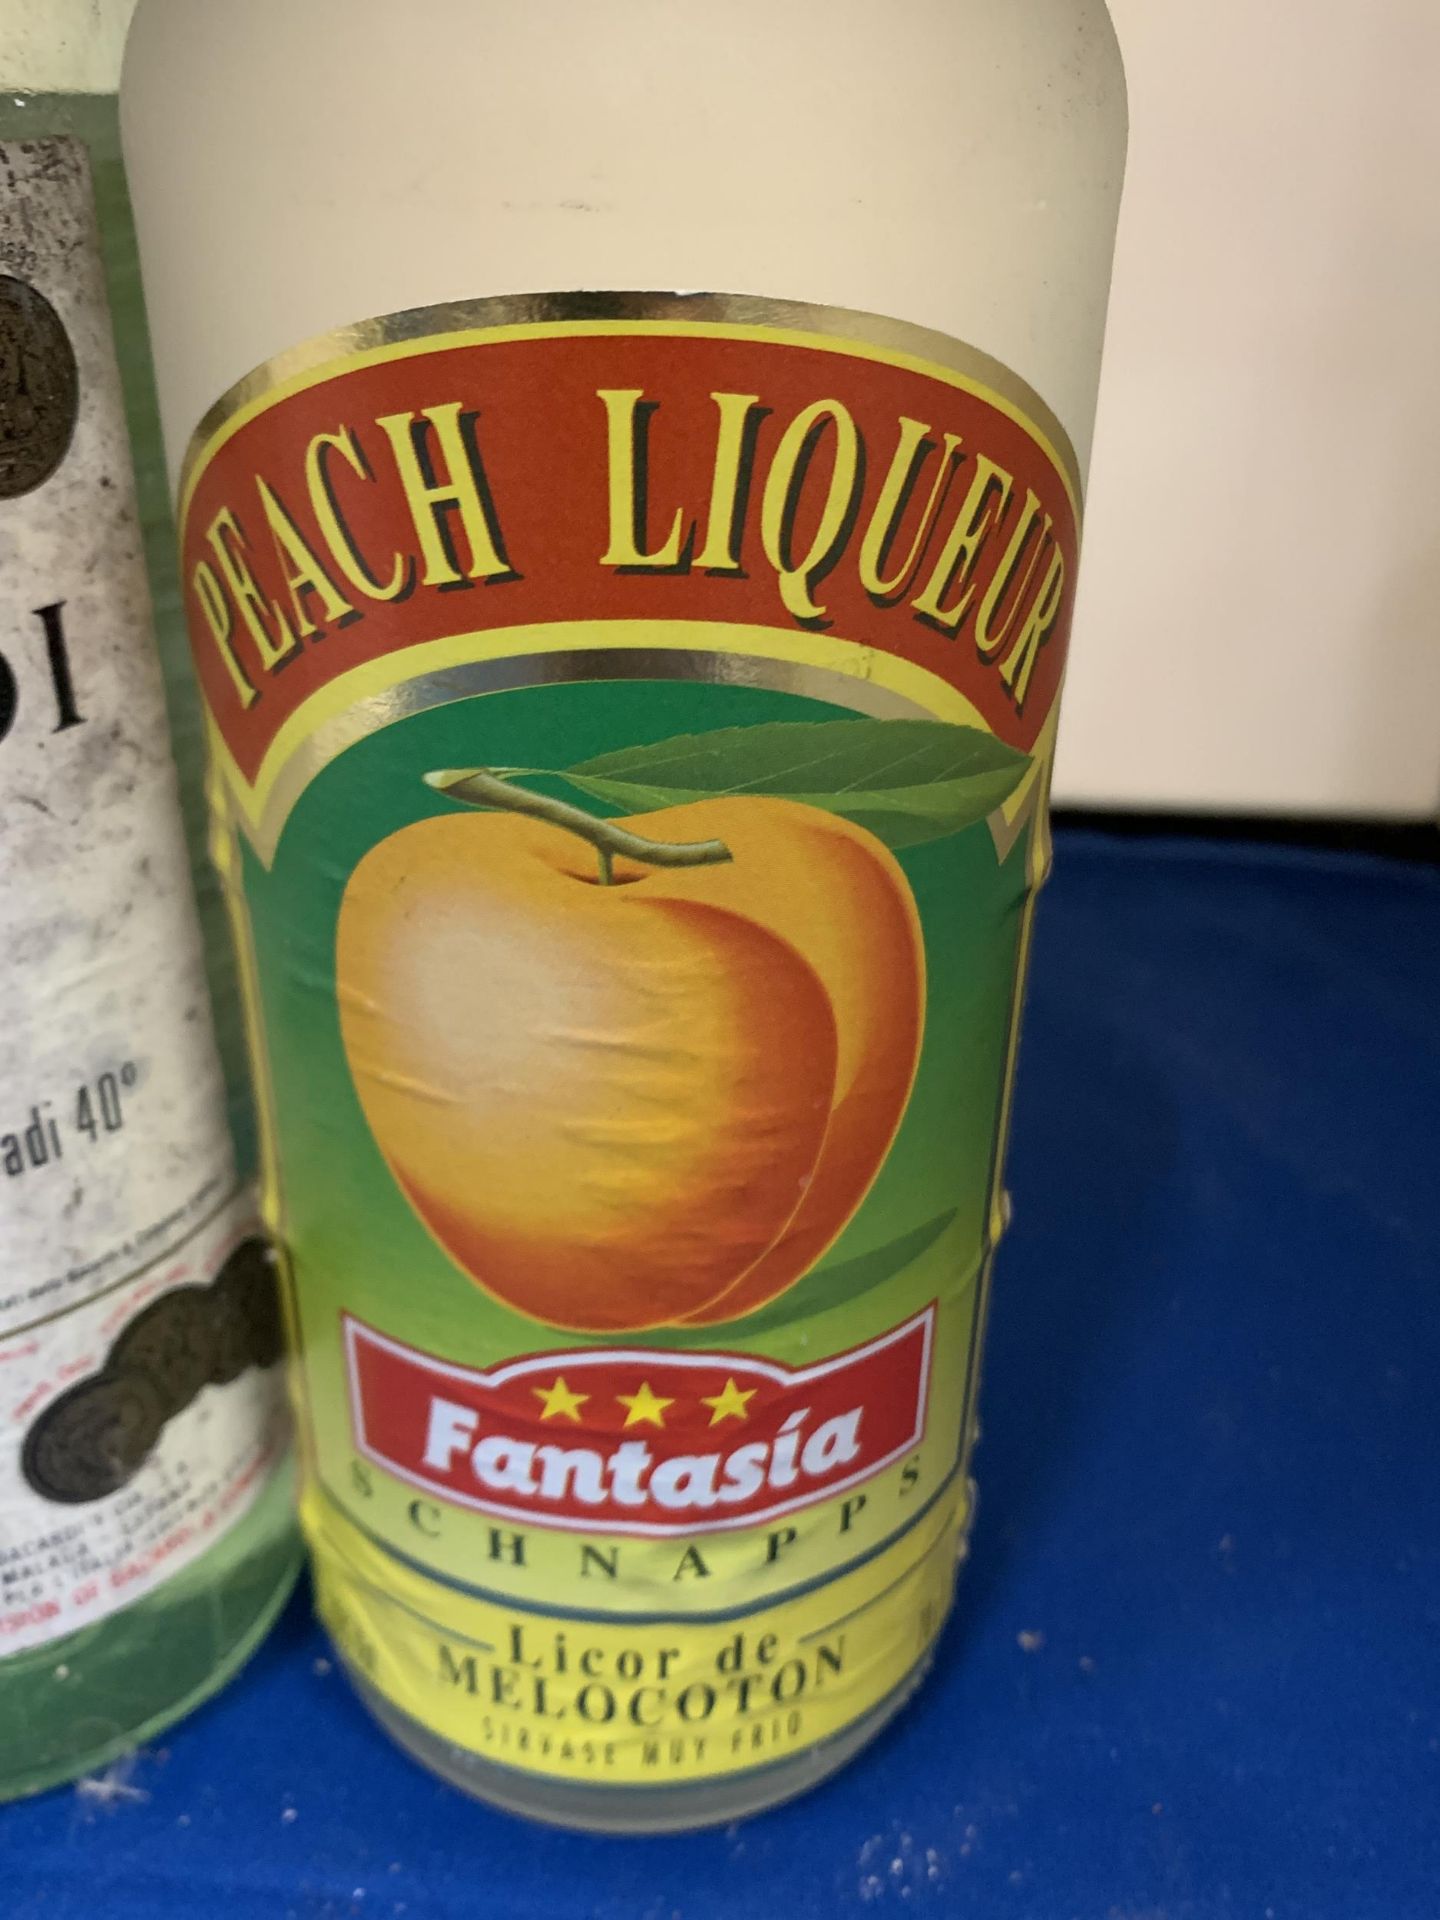 TWO BOTTLES TO INLCUDE A BACARDI SUPERIOR AND A PEACH LIQUEUR - Image 3 of 3